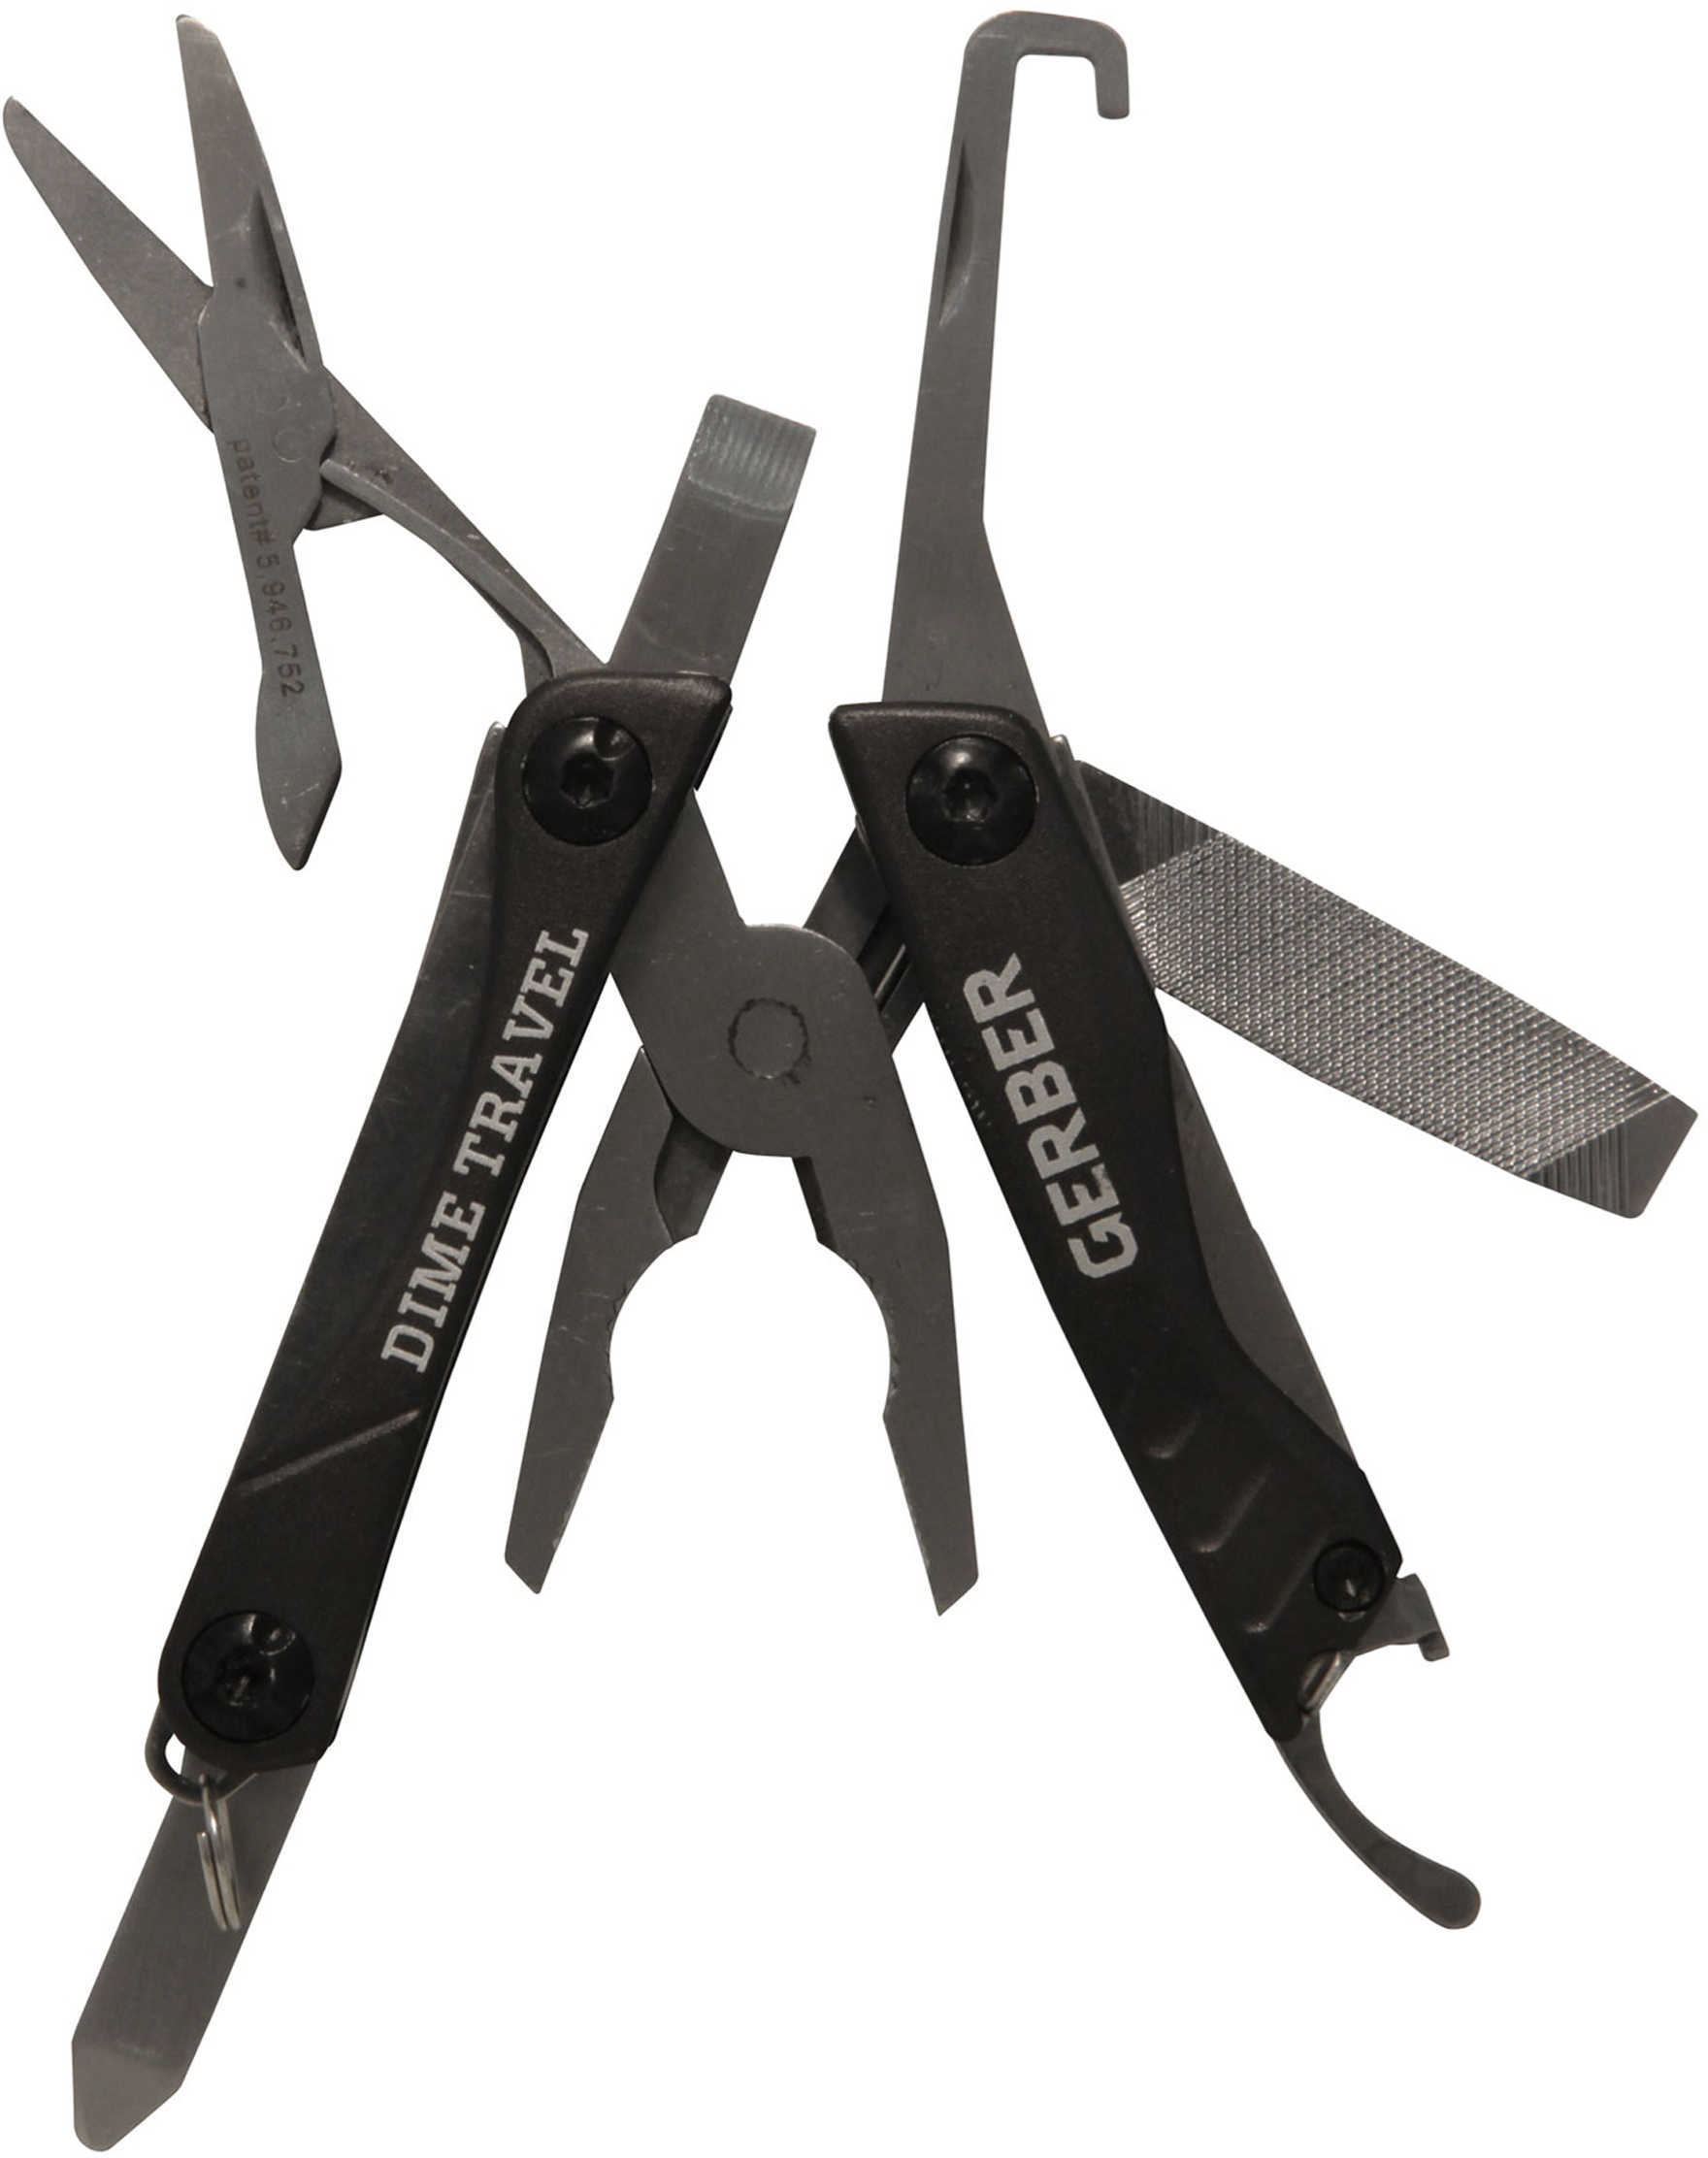 Gerber Blades Dime Multi-Tool Bladeless, Clam Package Md: 31-002843